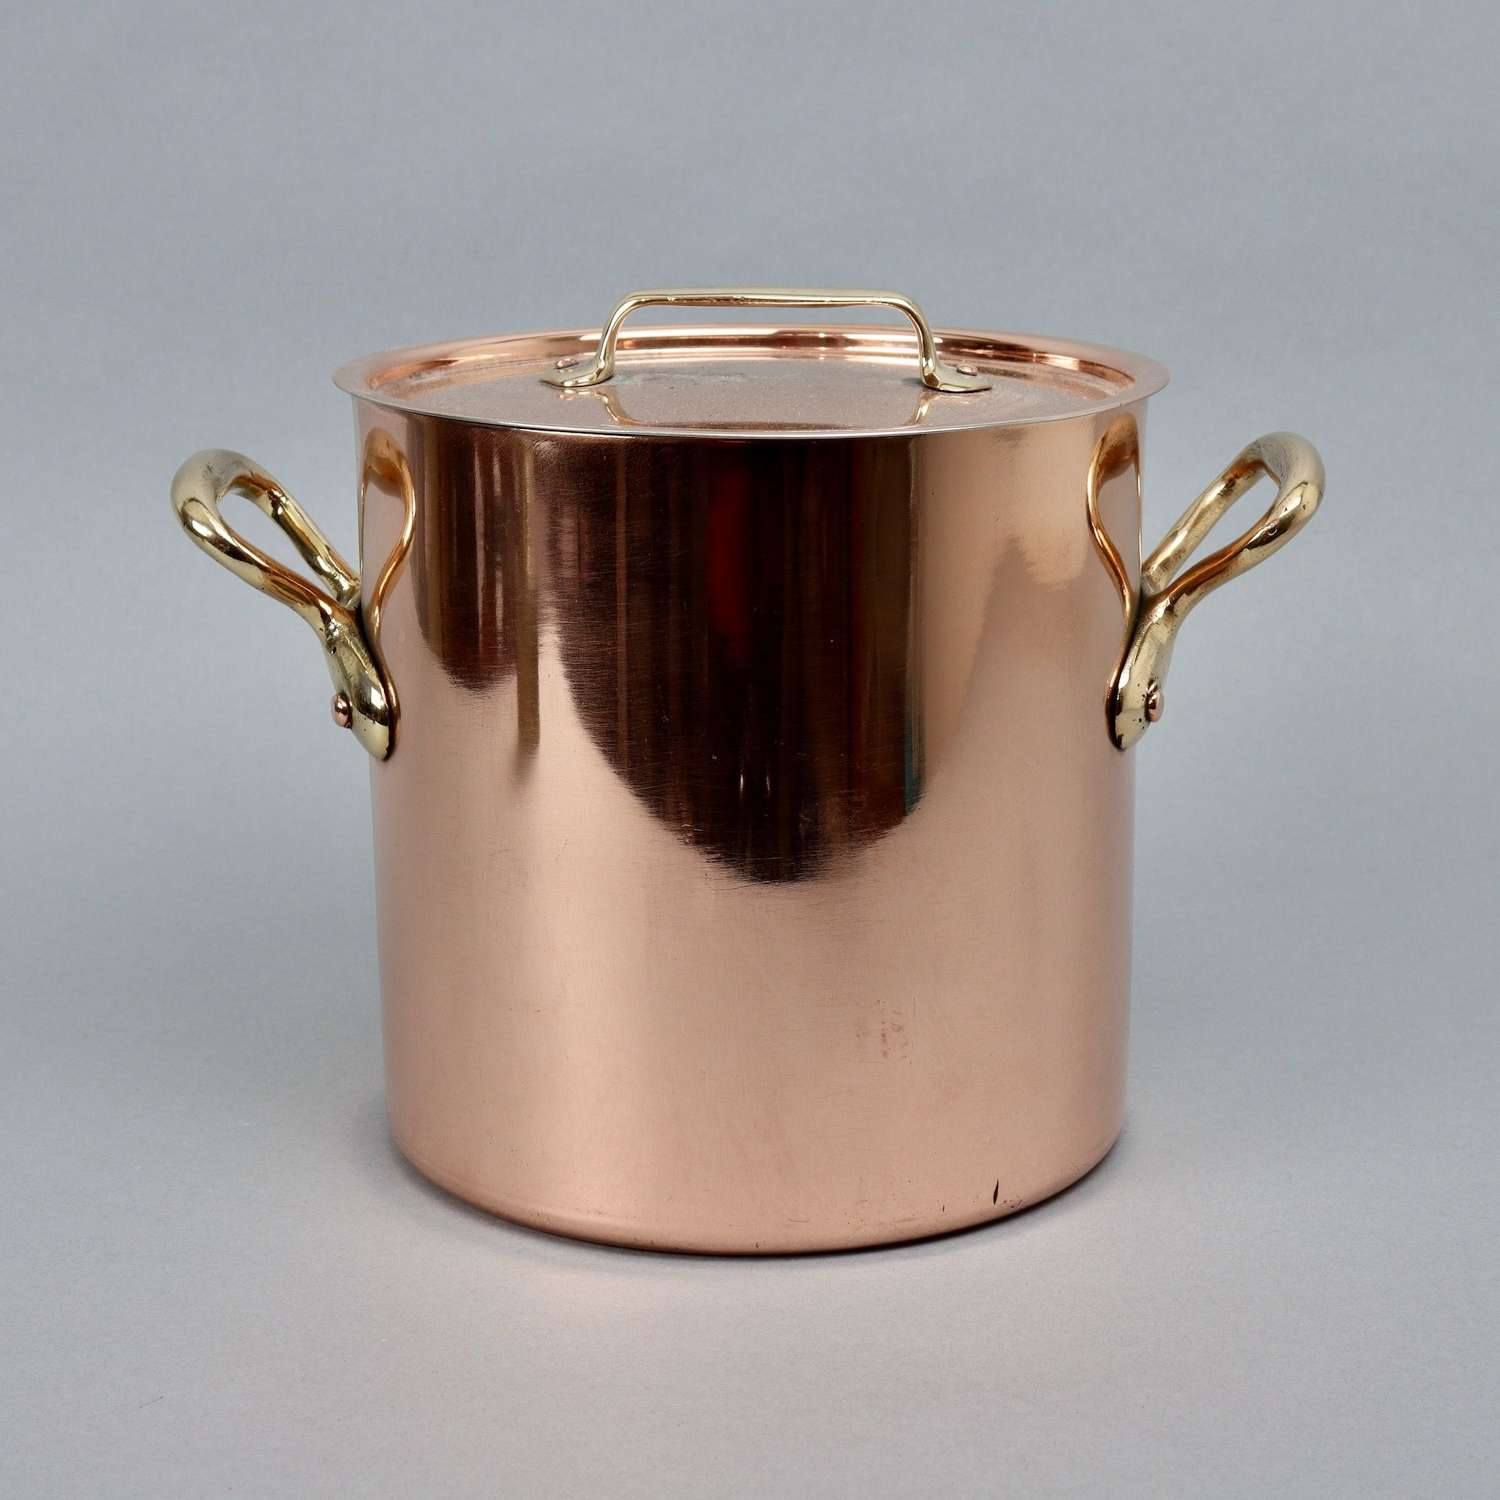 Very Small, French Copper Stockpot